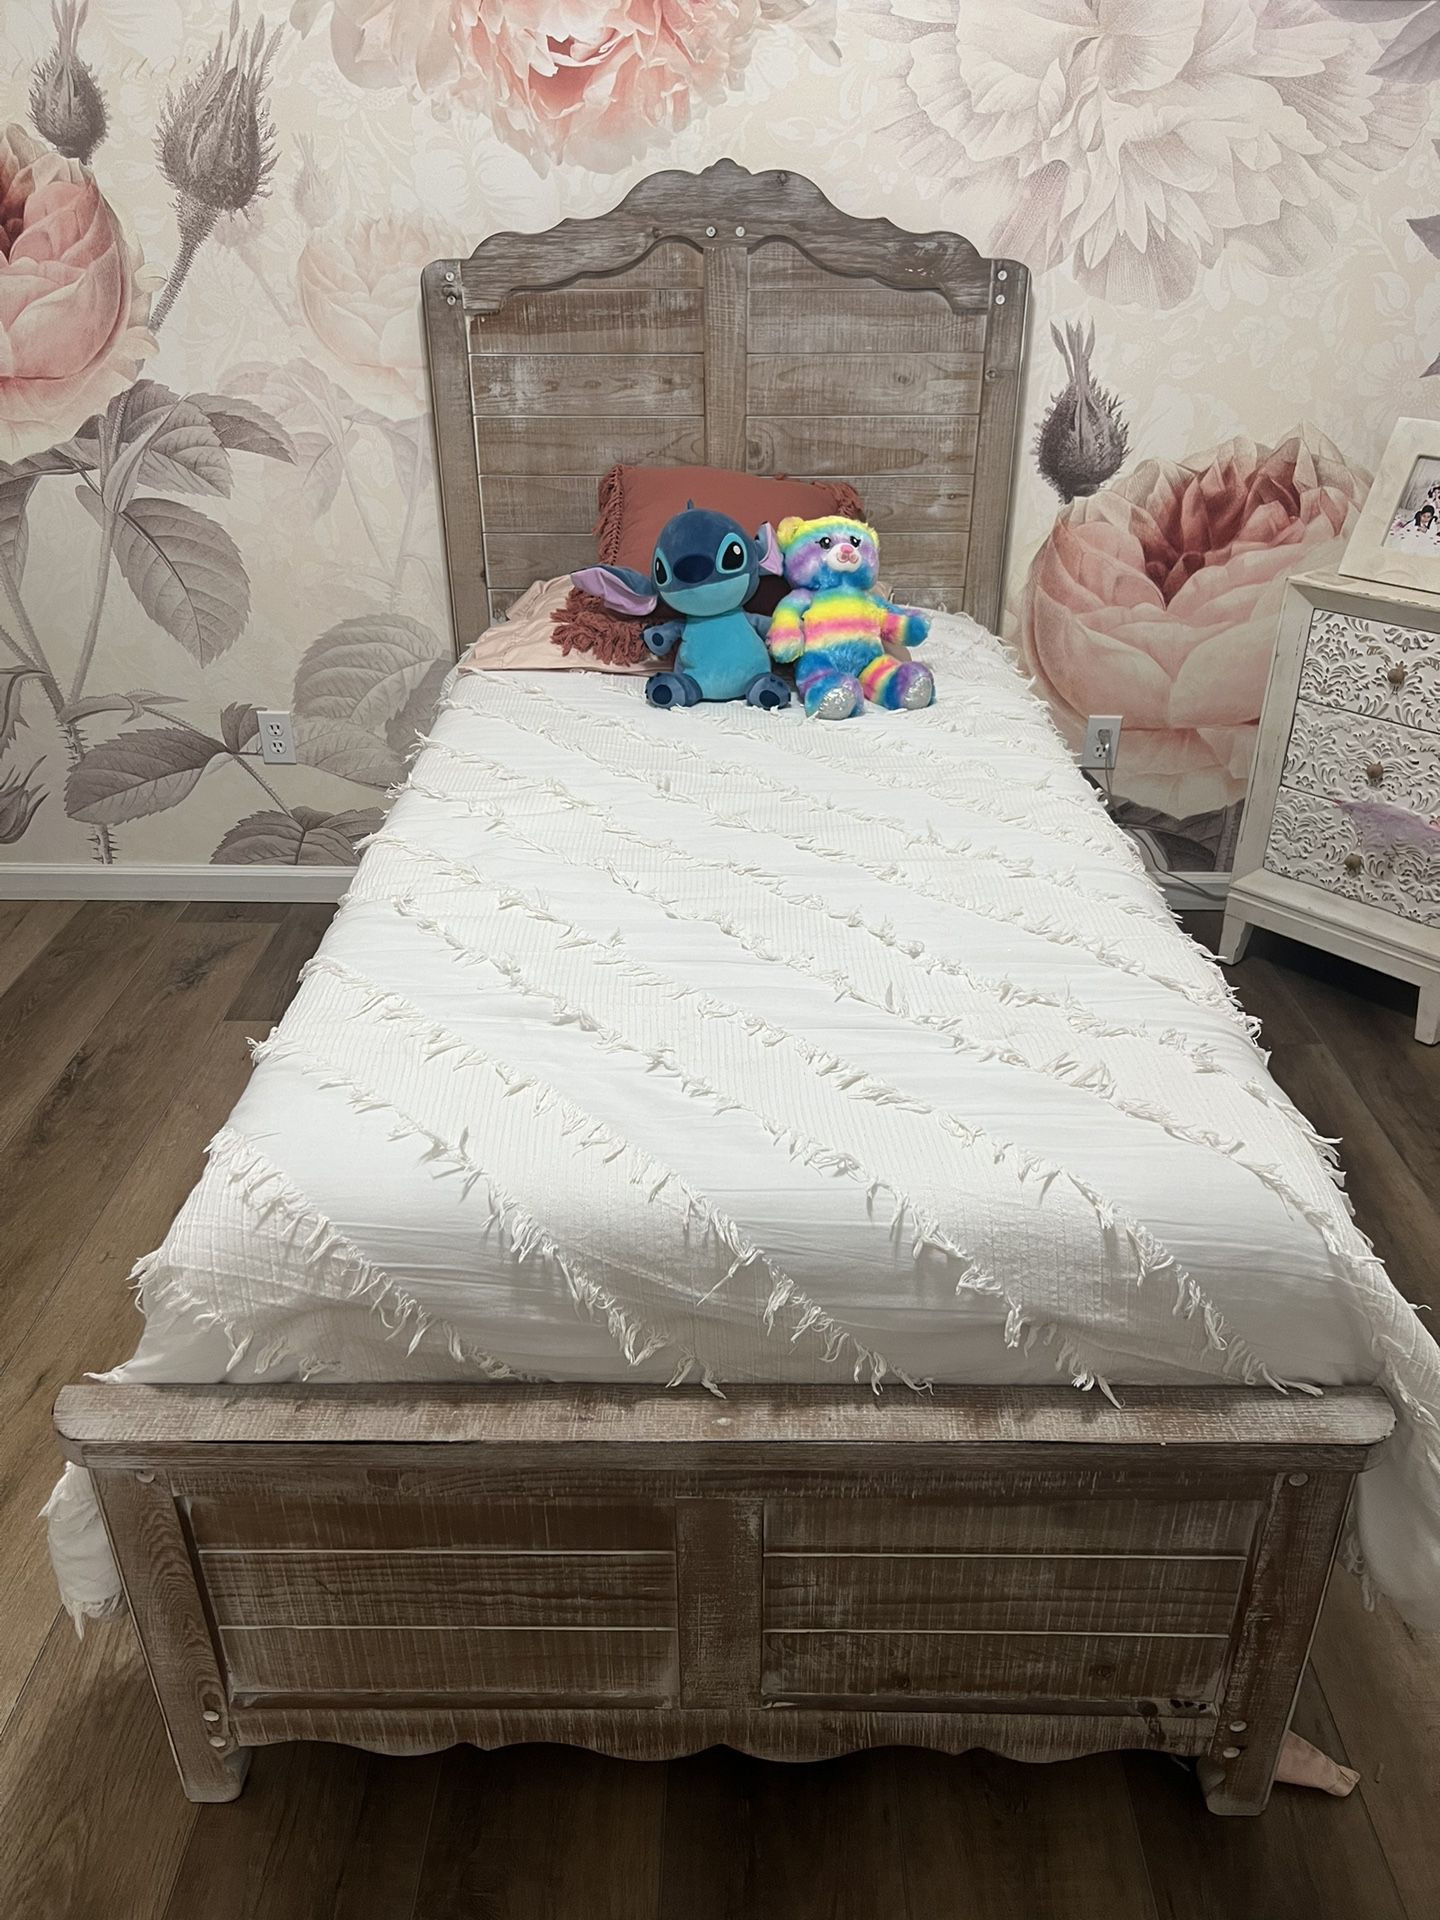 Twin Bedframe With Mattress And Box spring 